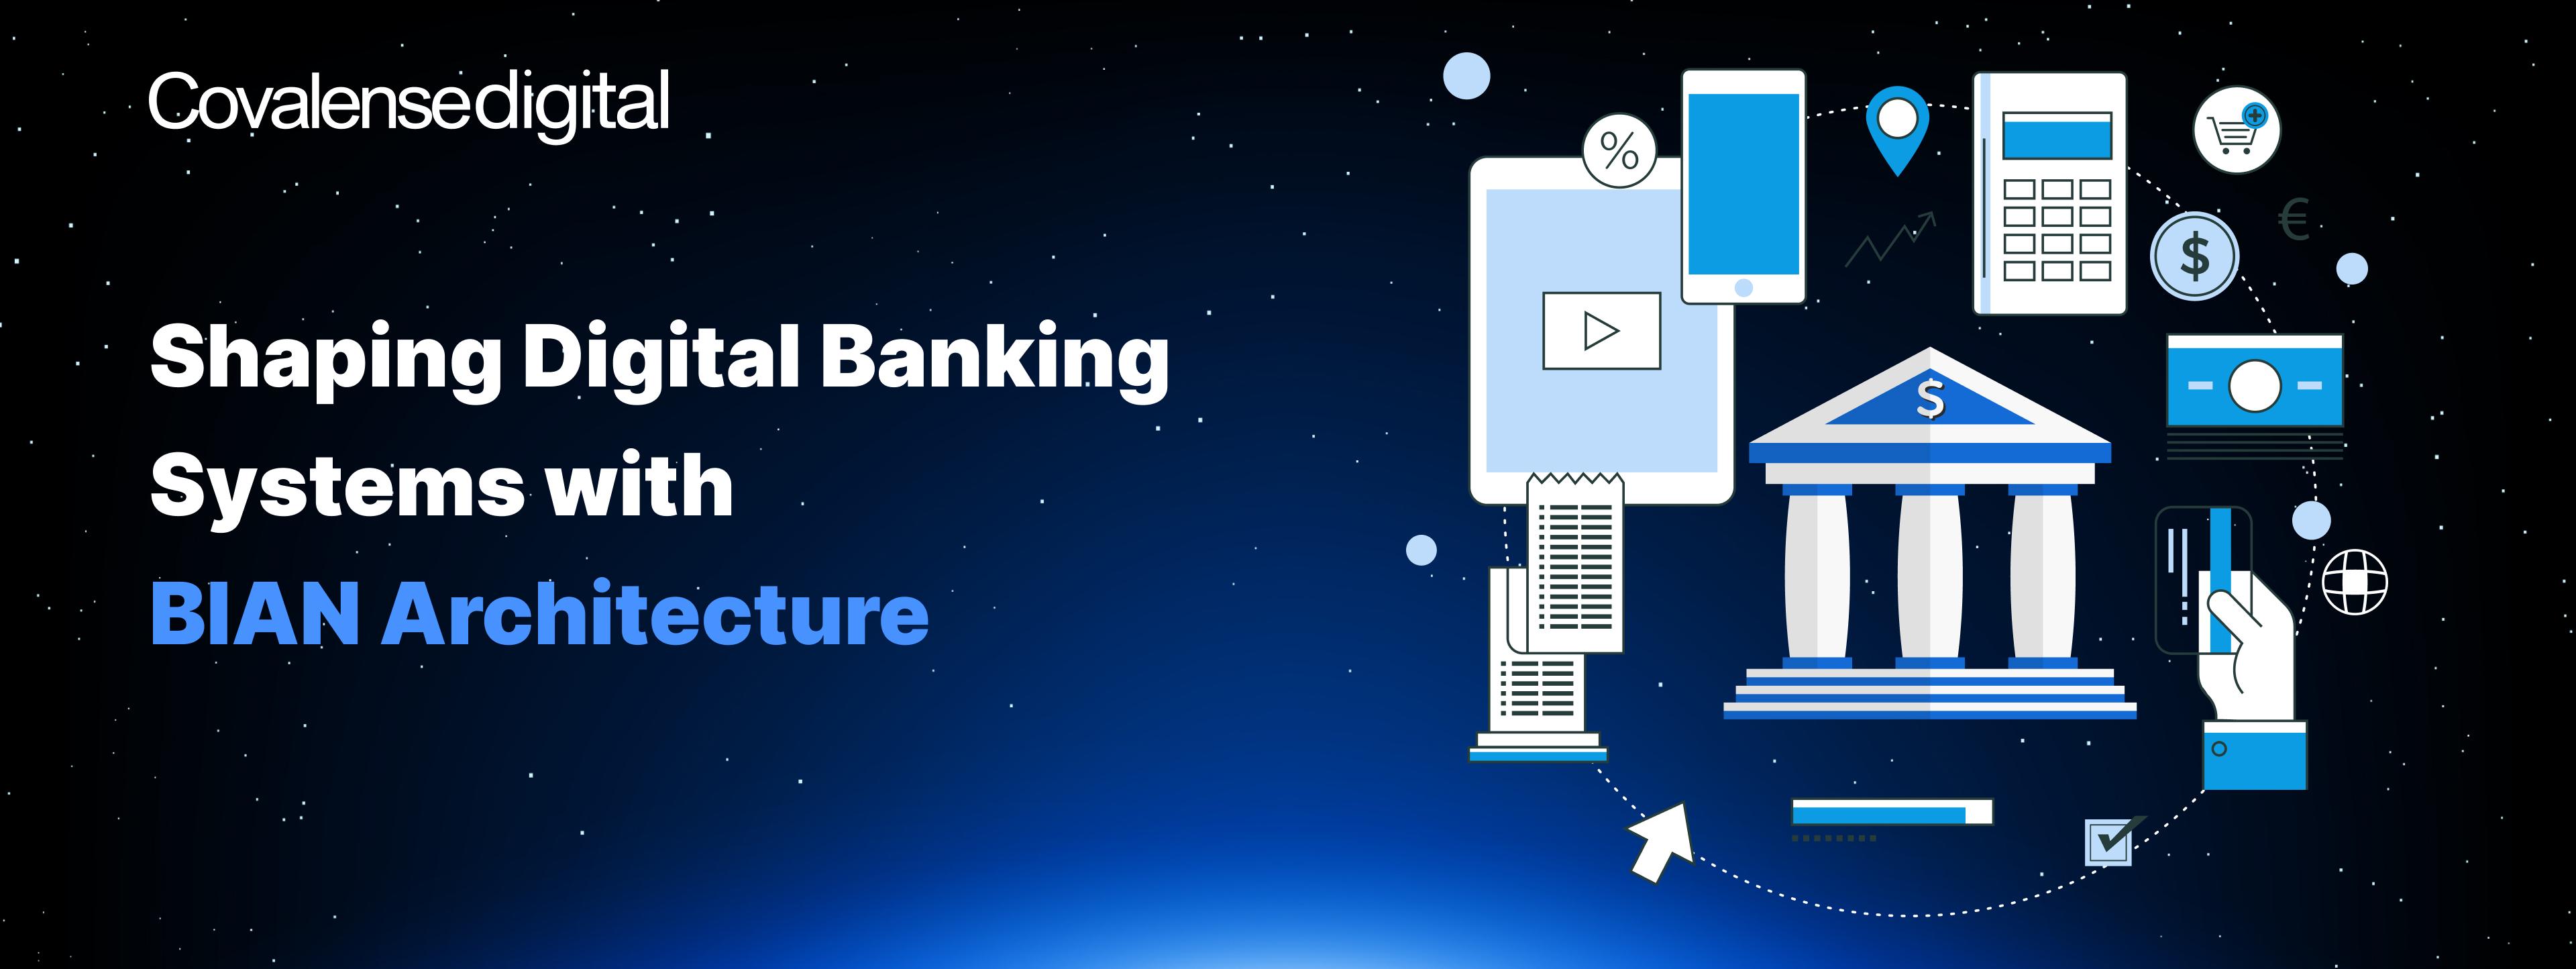 BIAN Architecture Unveiled: Transforming Banking Systems in the Digital Era